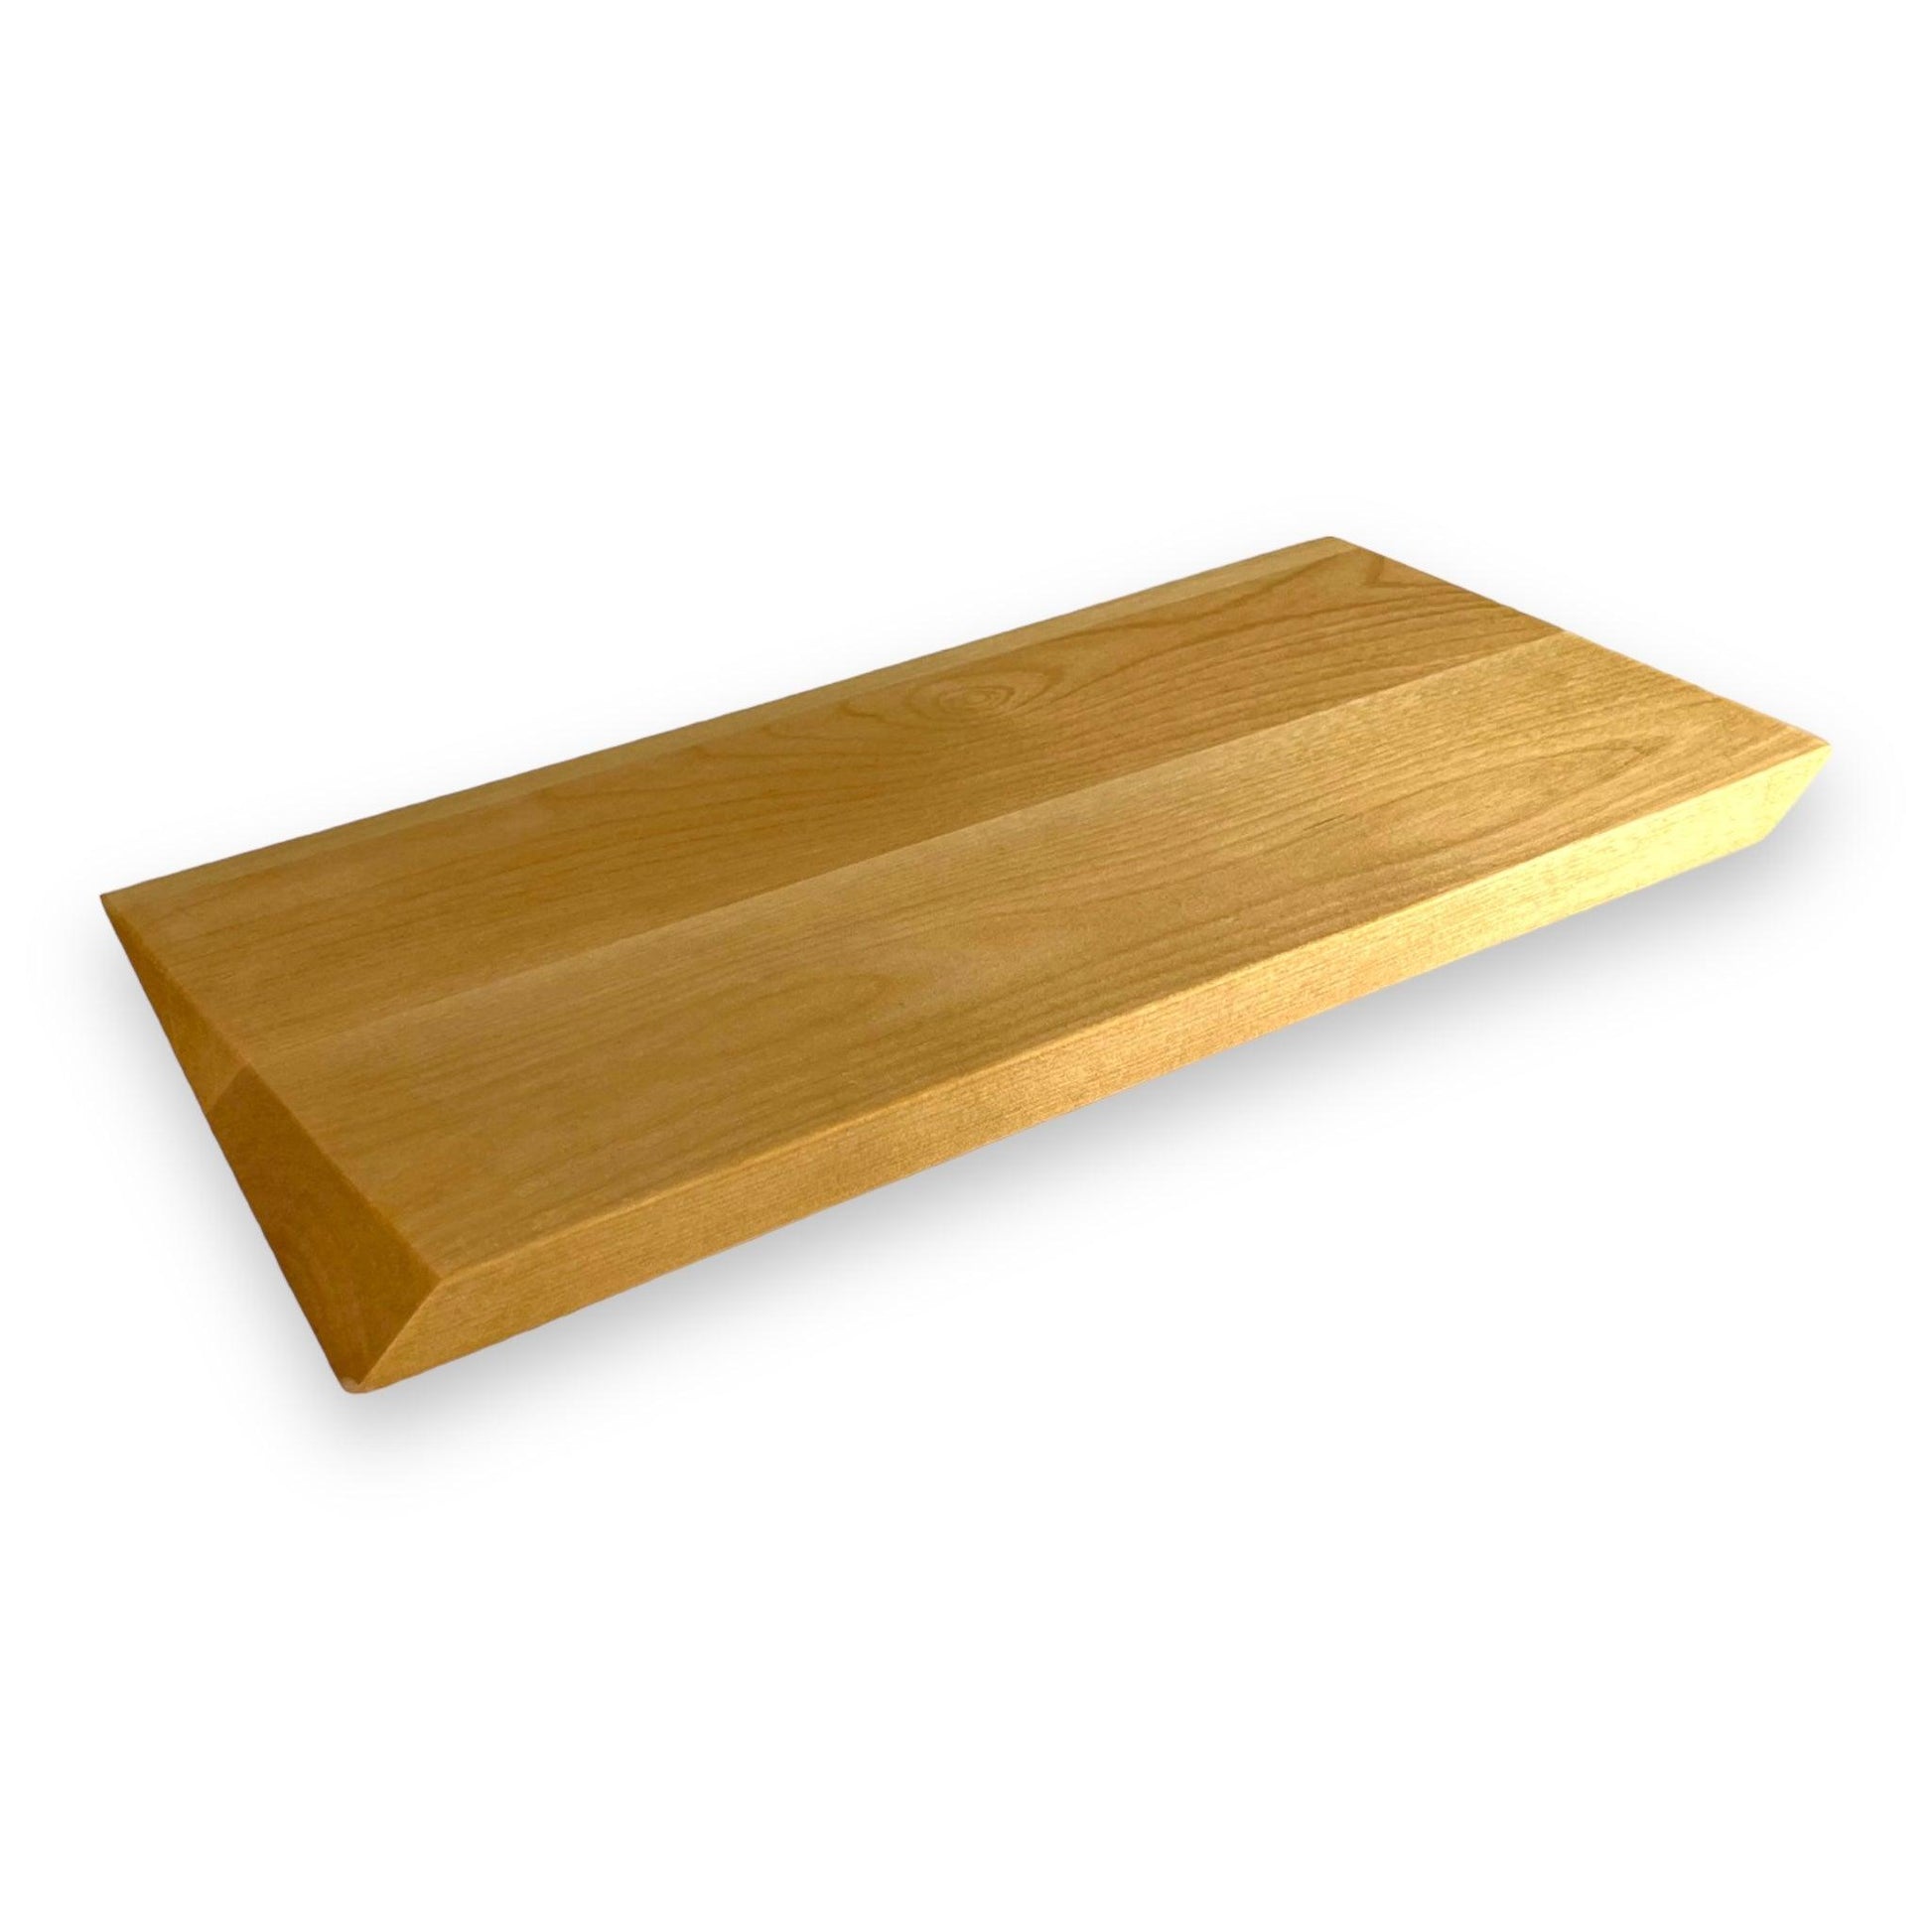 Wooden tray for coffee, Cherry wood, Z-cut, 6'' X 14 - BOISWOOD